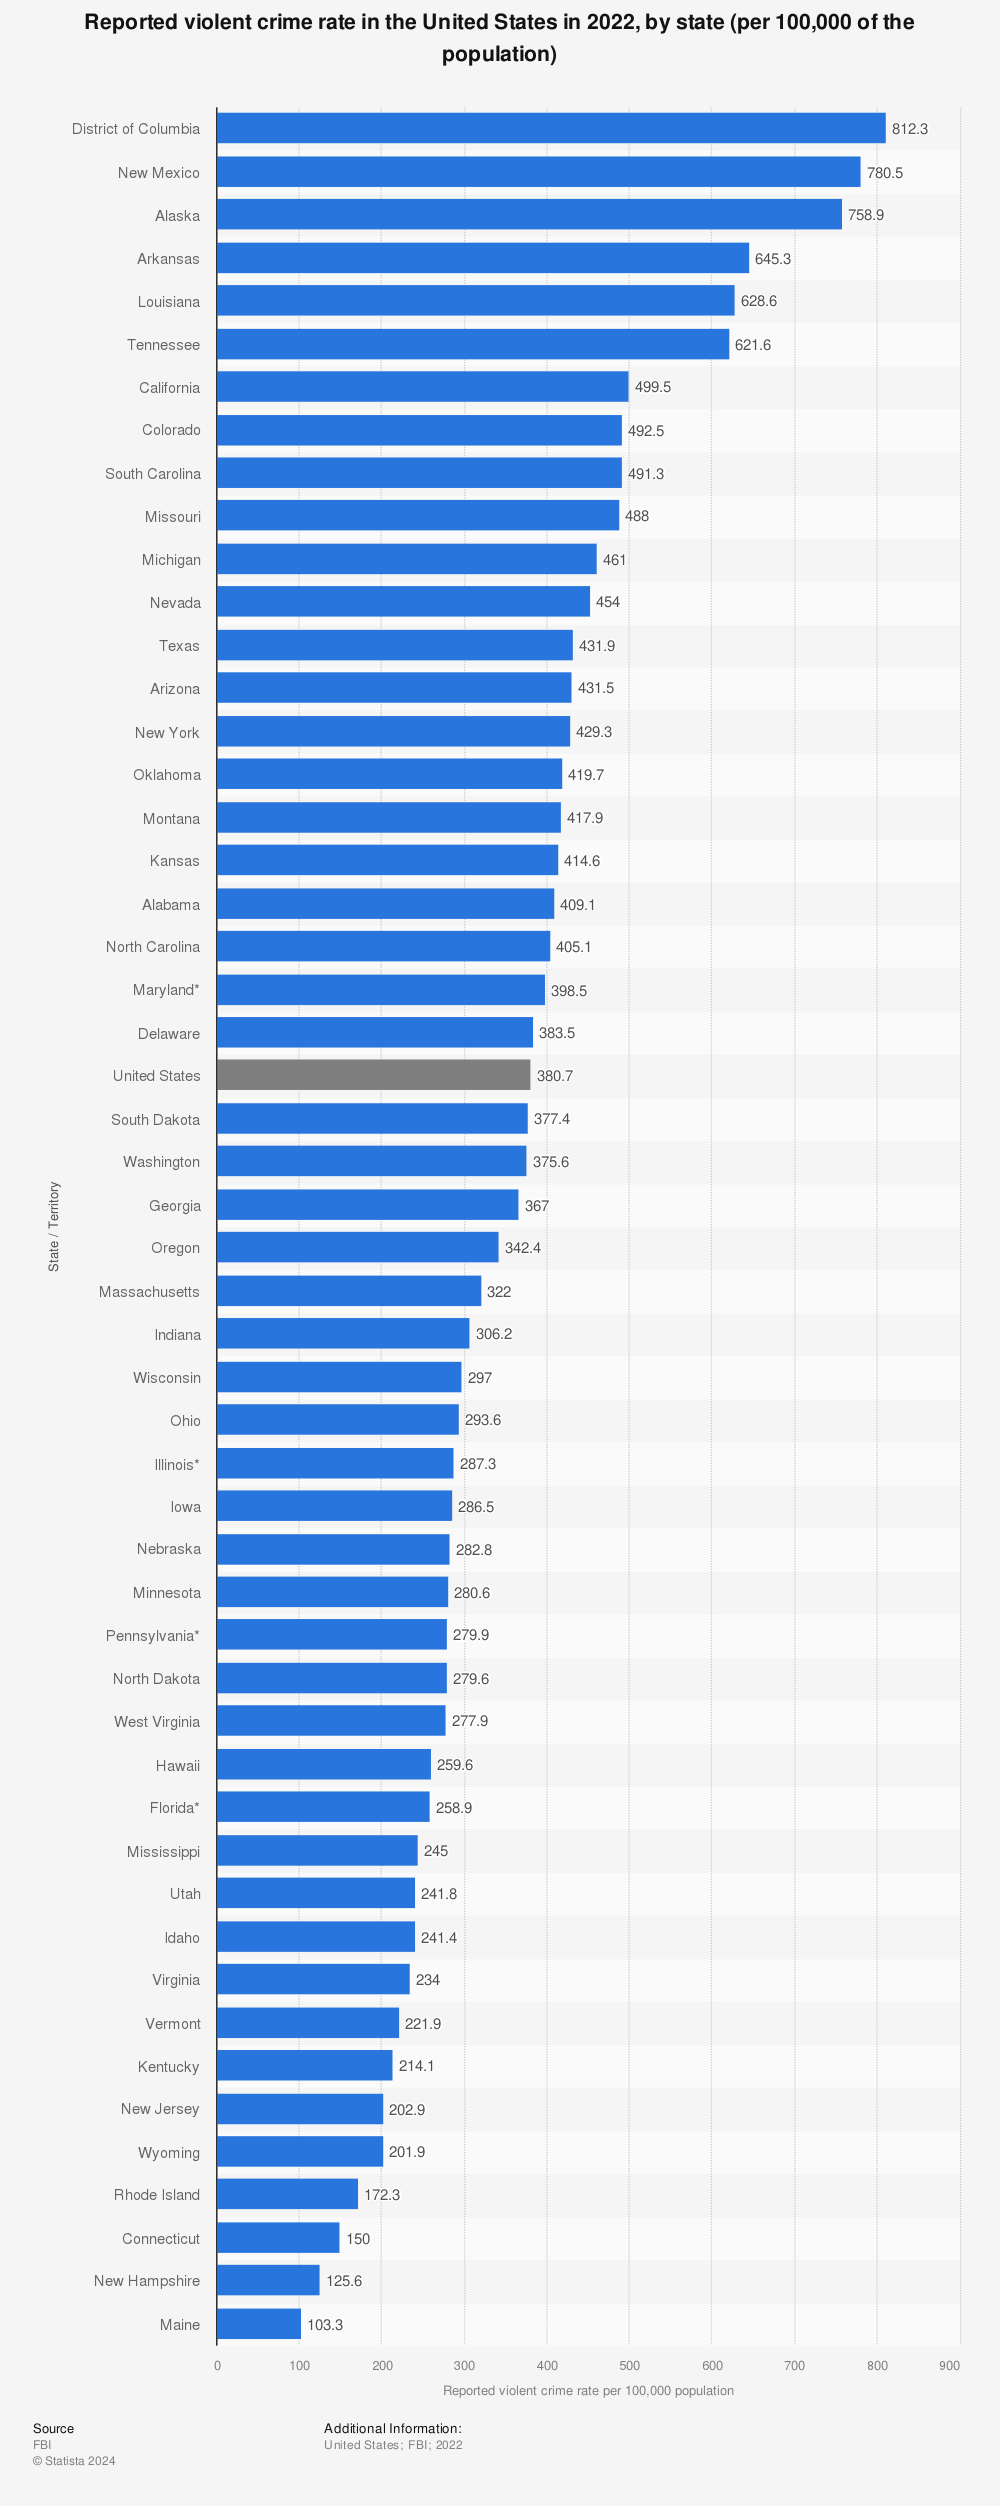 Statistic: Reported violent crime rate in the United States in 2020, by state (per 100,000 of the population) | Statista